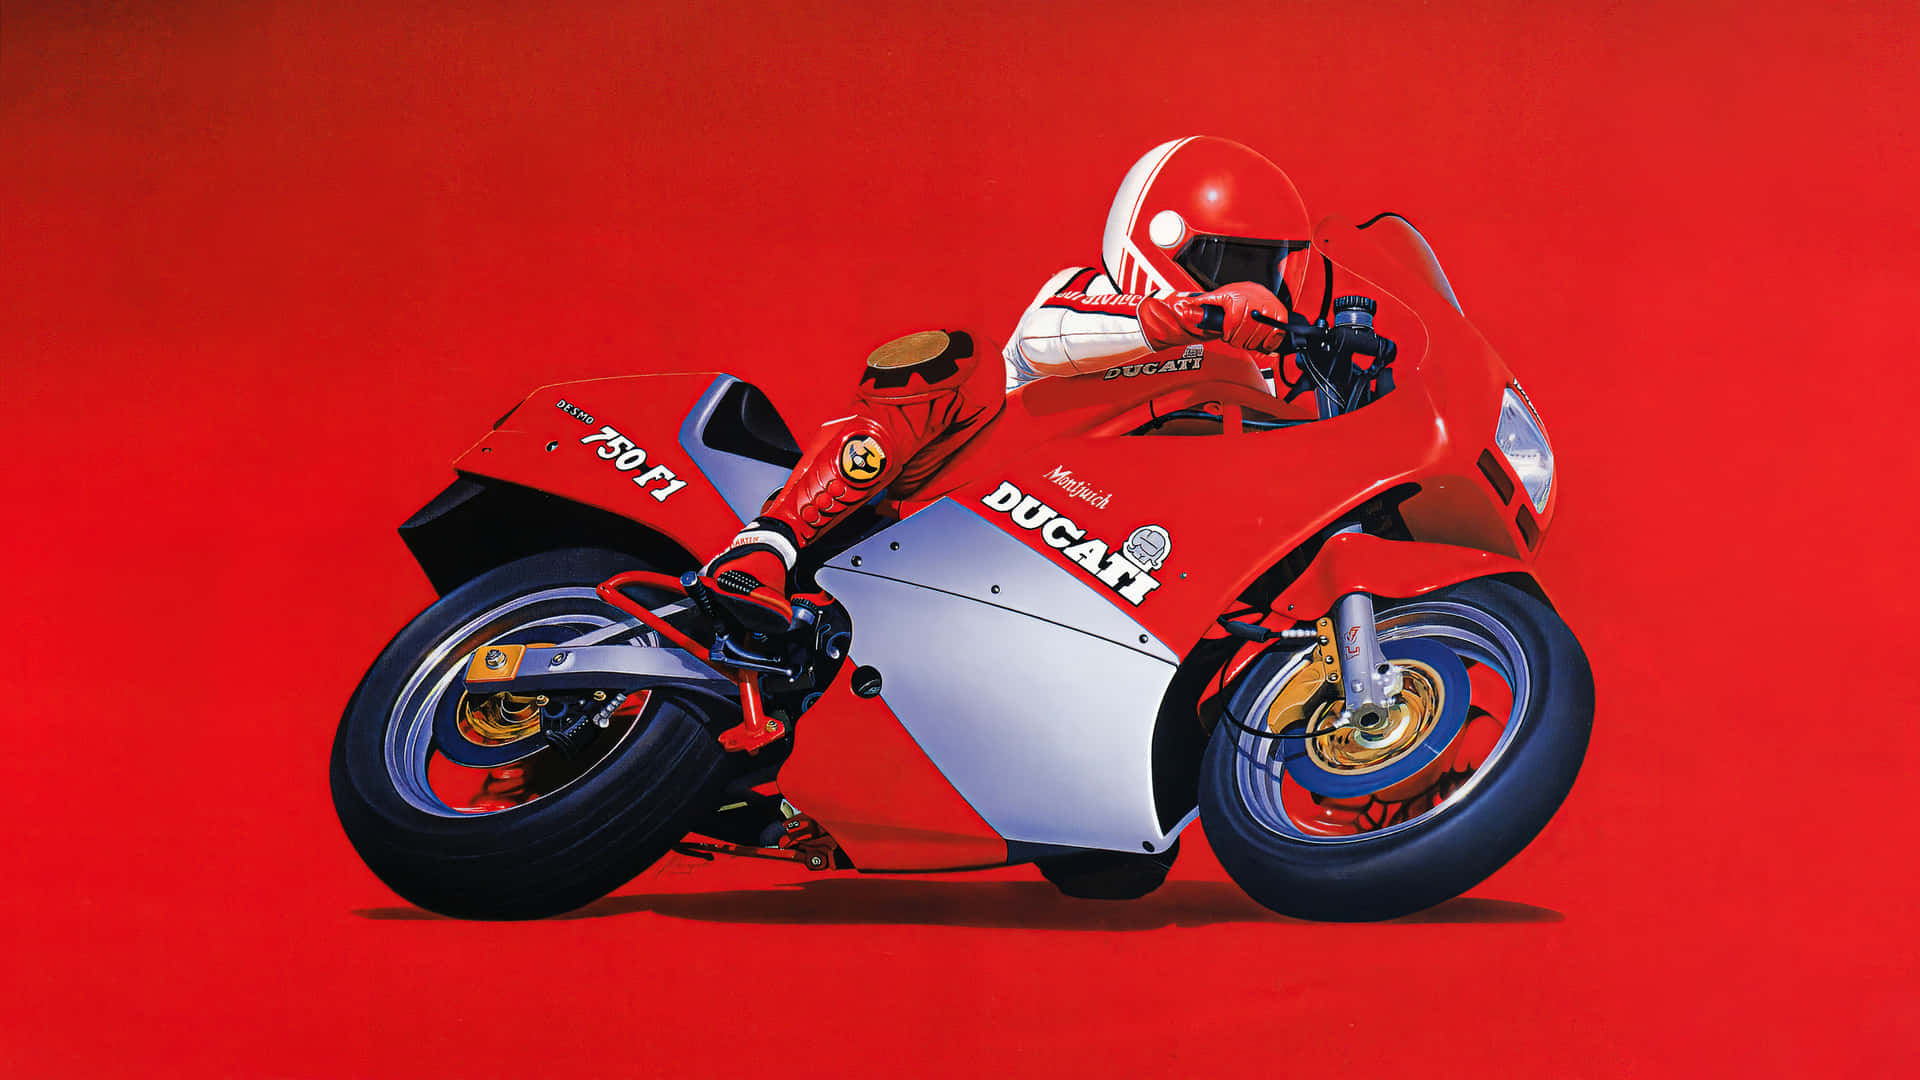 2560x1440 Ducati Motorcycle Picture